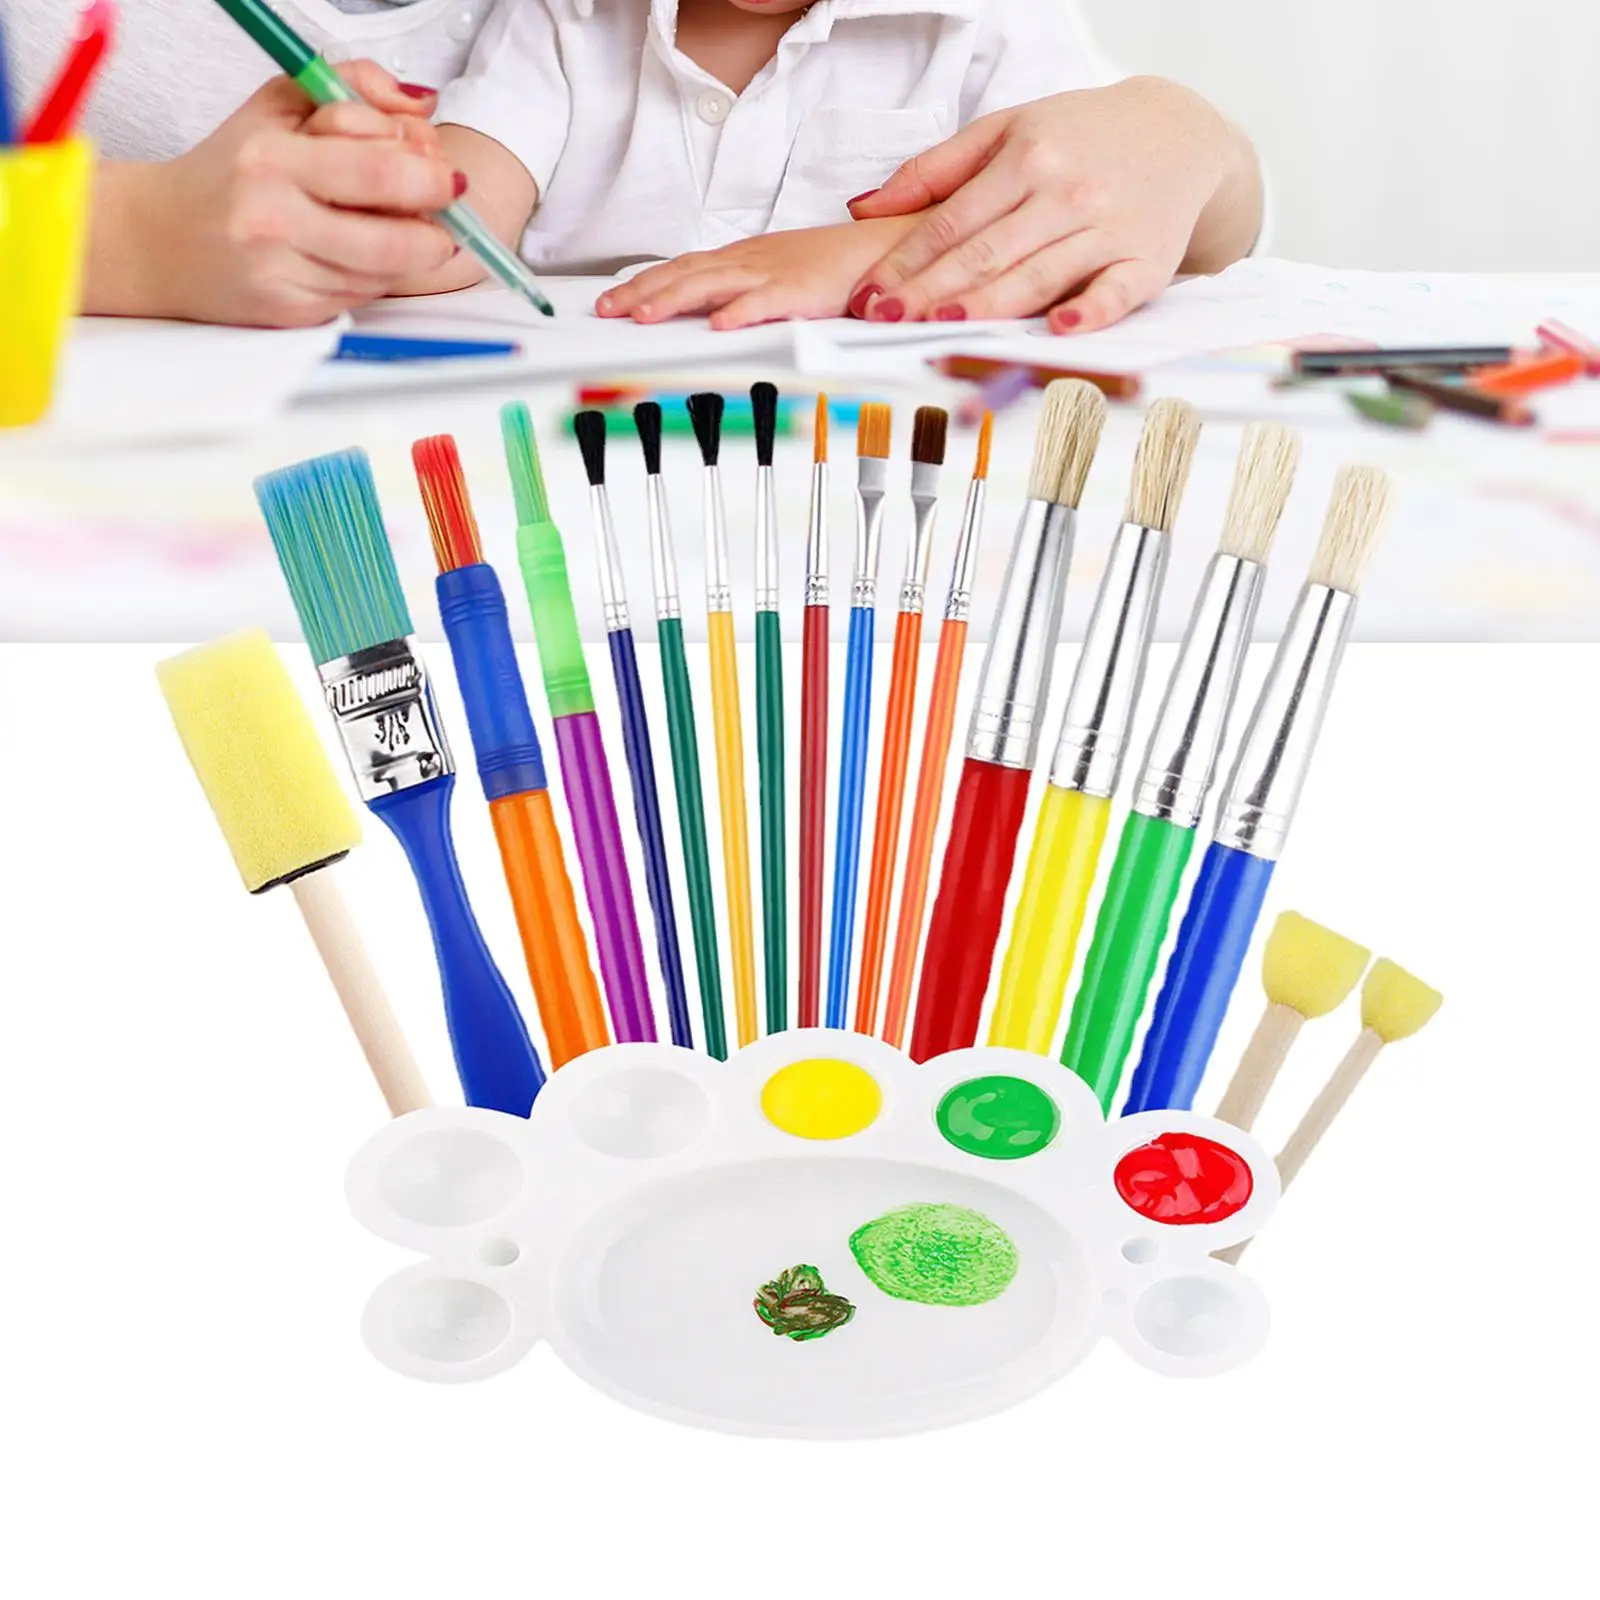 19Pcs Paint Brush Set Watercolor Acrylic Paint Boys and Girls Portable Child Adults Crafting Tools Art Supplies Painting Brushes